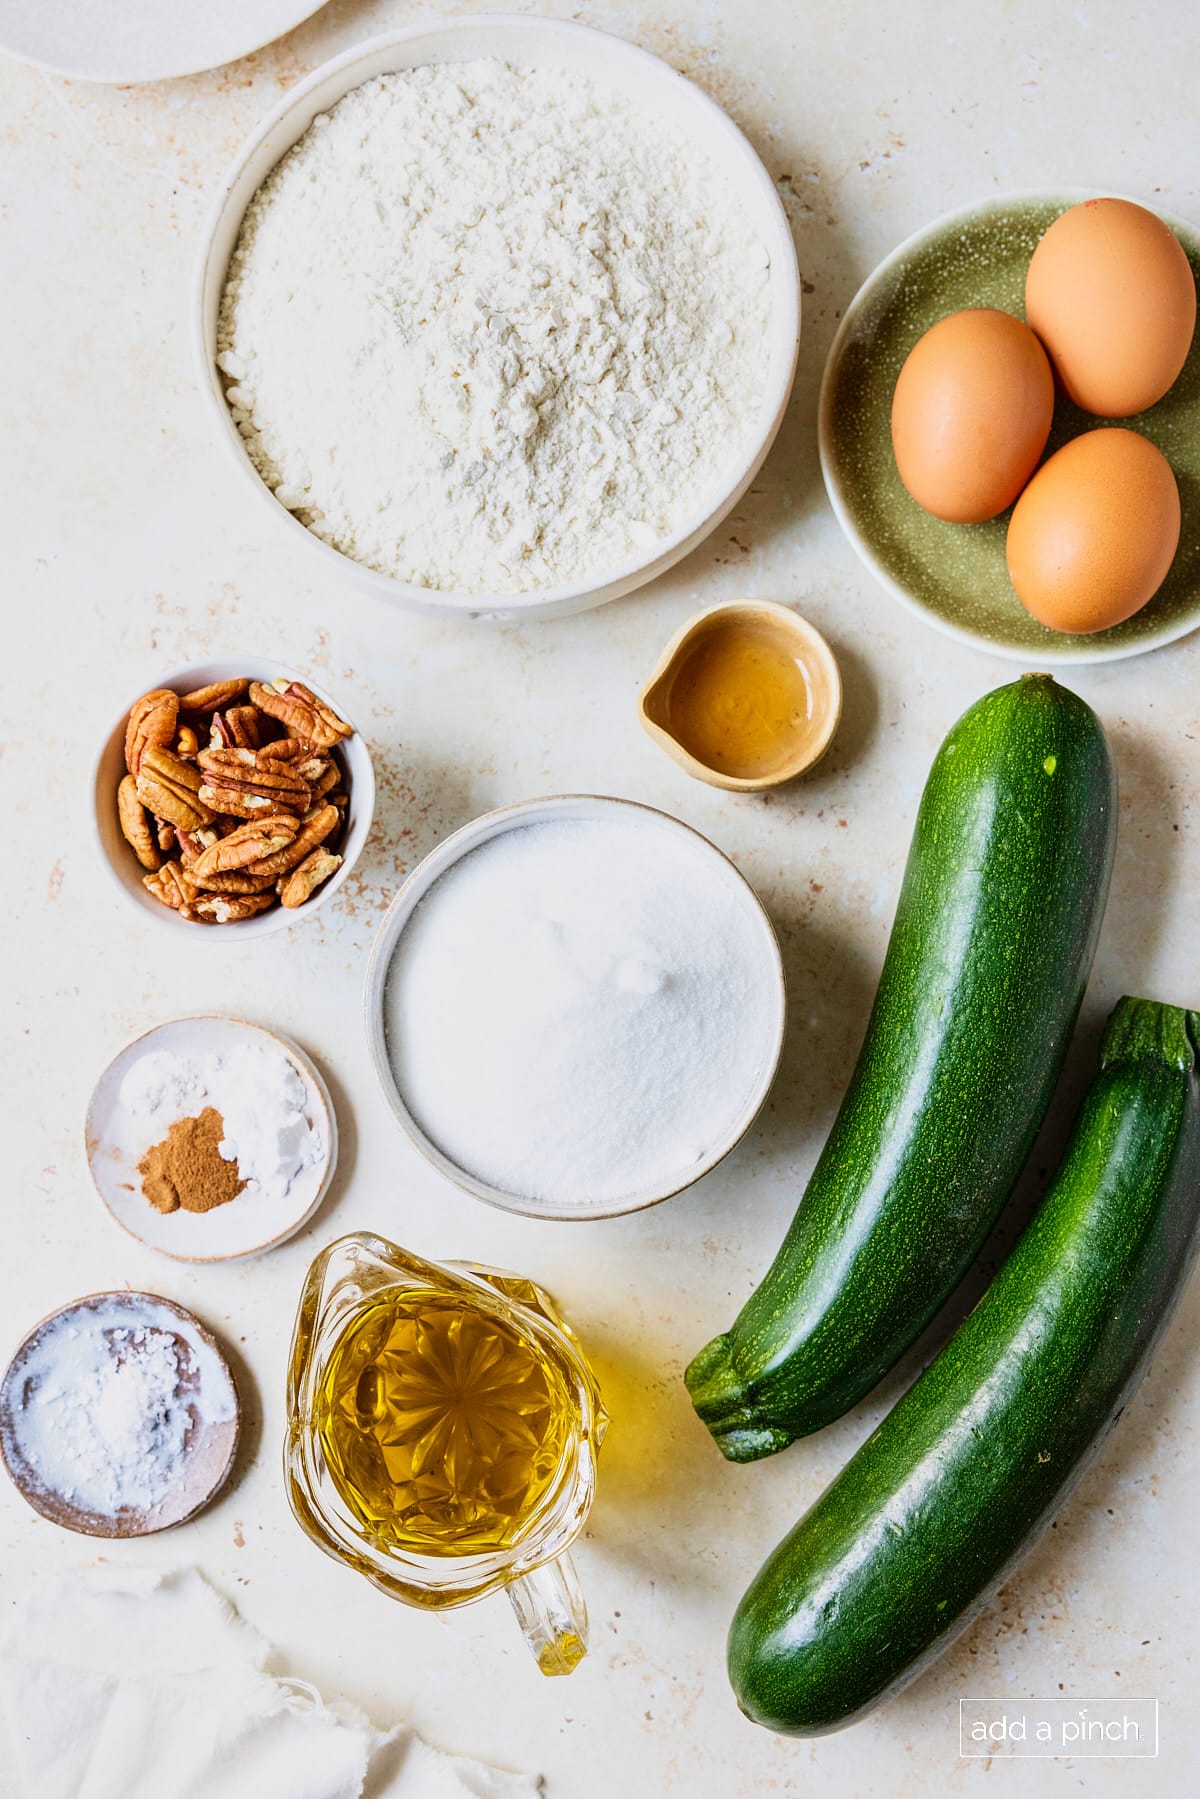 Ingredients used to make homemade zucchini bread on a white surface.